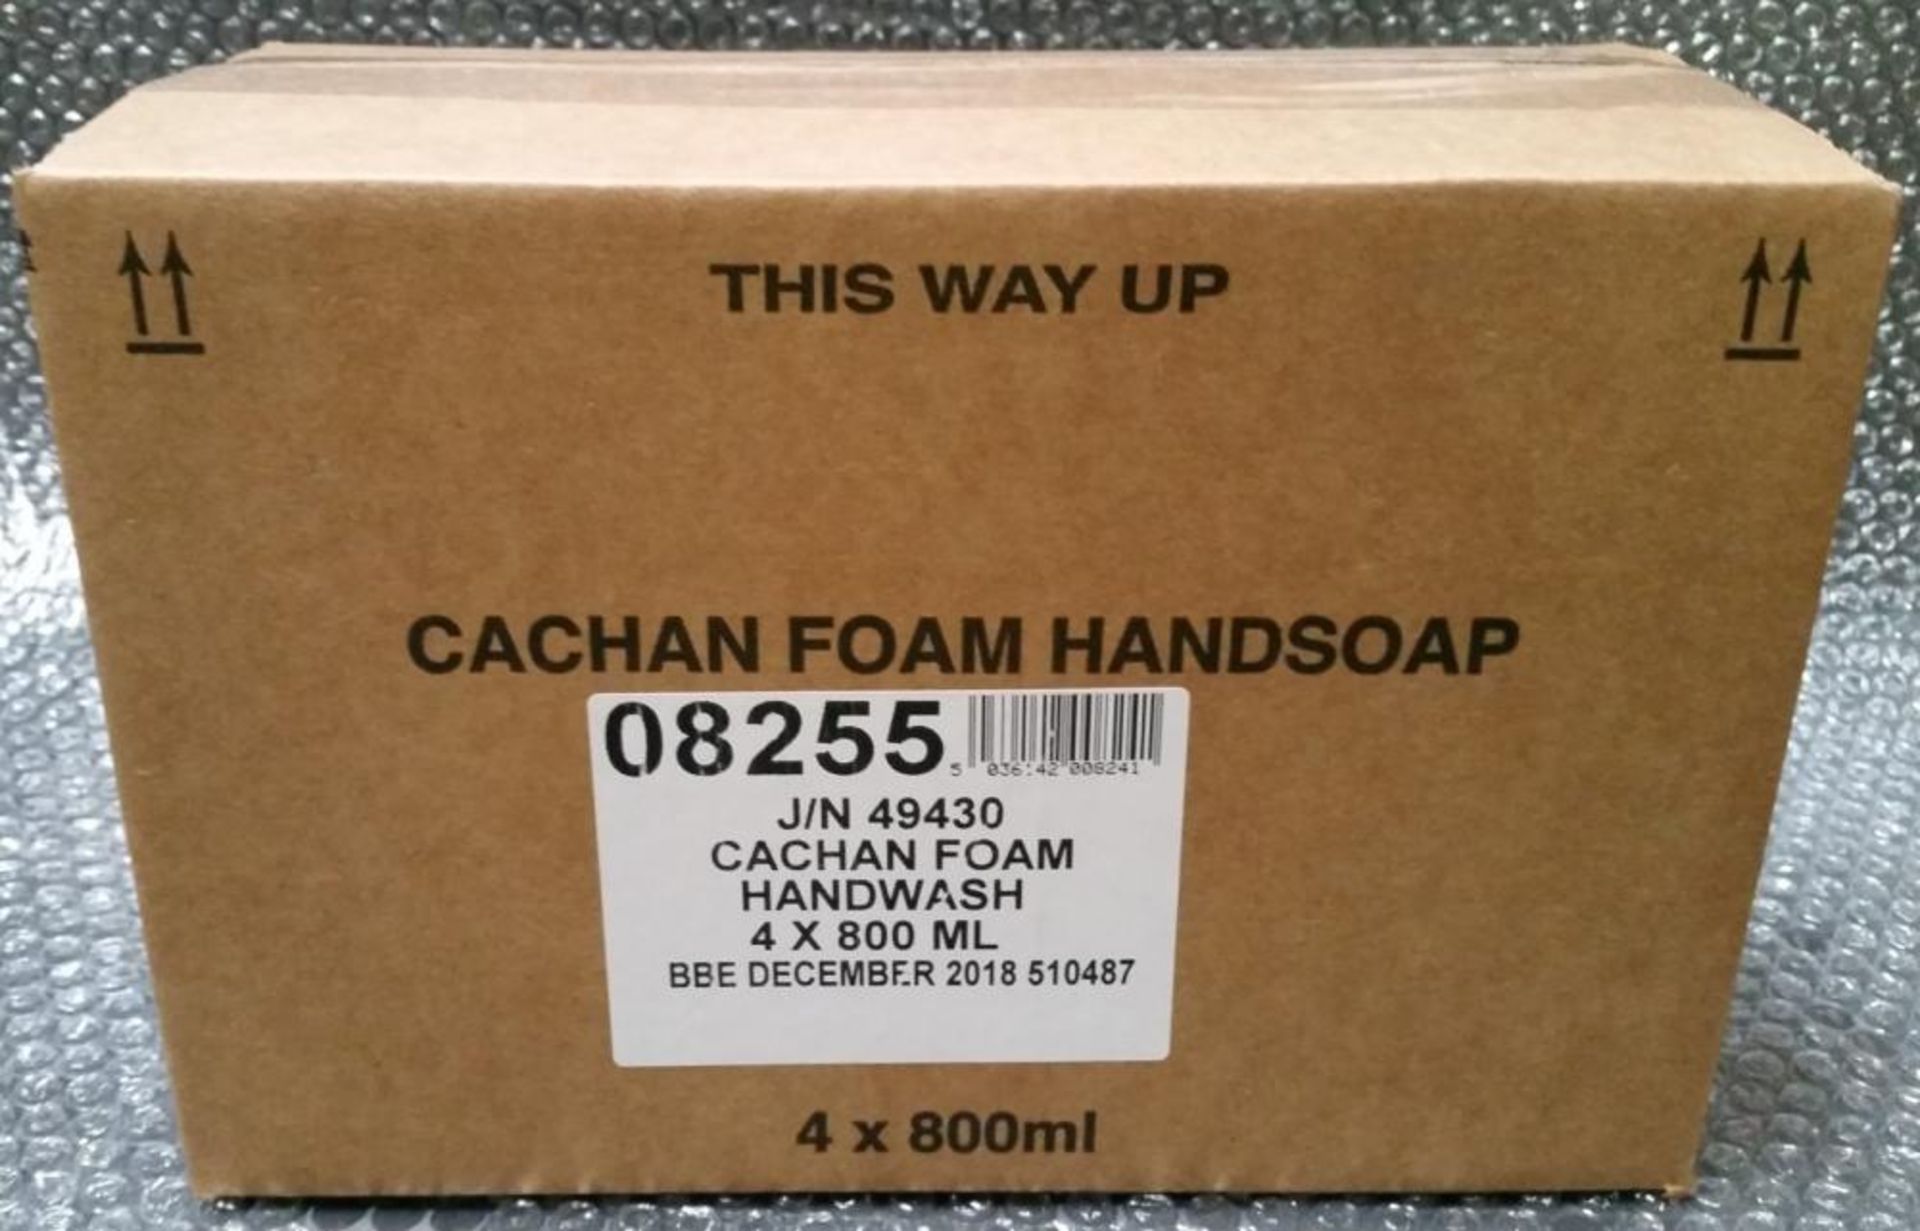 4 x Cachan Foam 800ml Handwash - Suitable For Foaming Dispnesers - Expiry December 2018 - New Boxed - Image 4 of 5